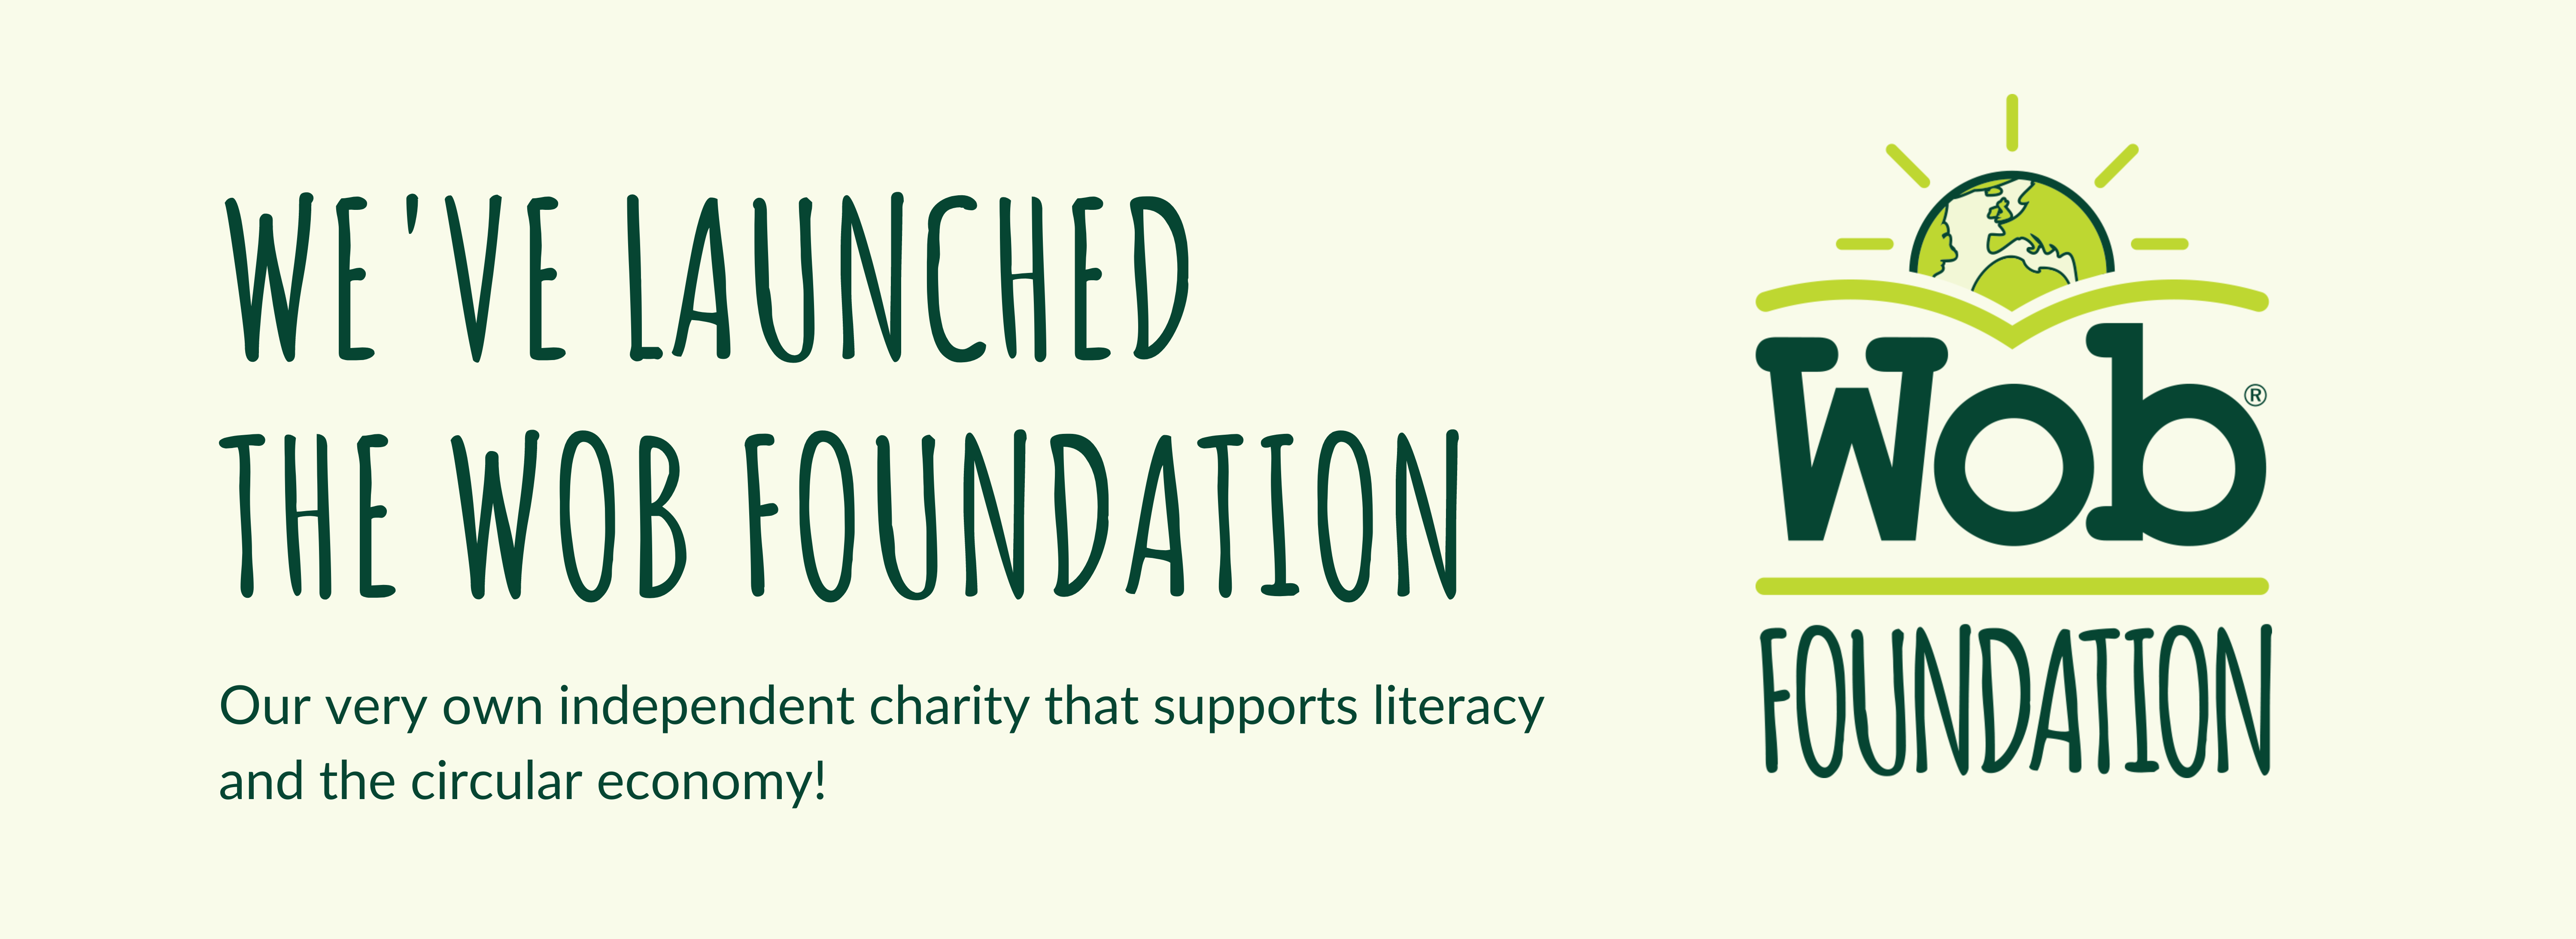 We've launched the Wob Foundation - Our very own independent charity that support literacy and the circular economy!